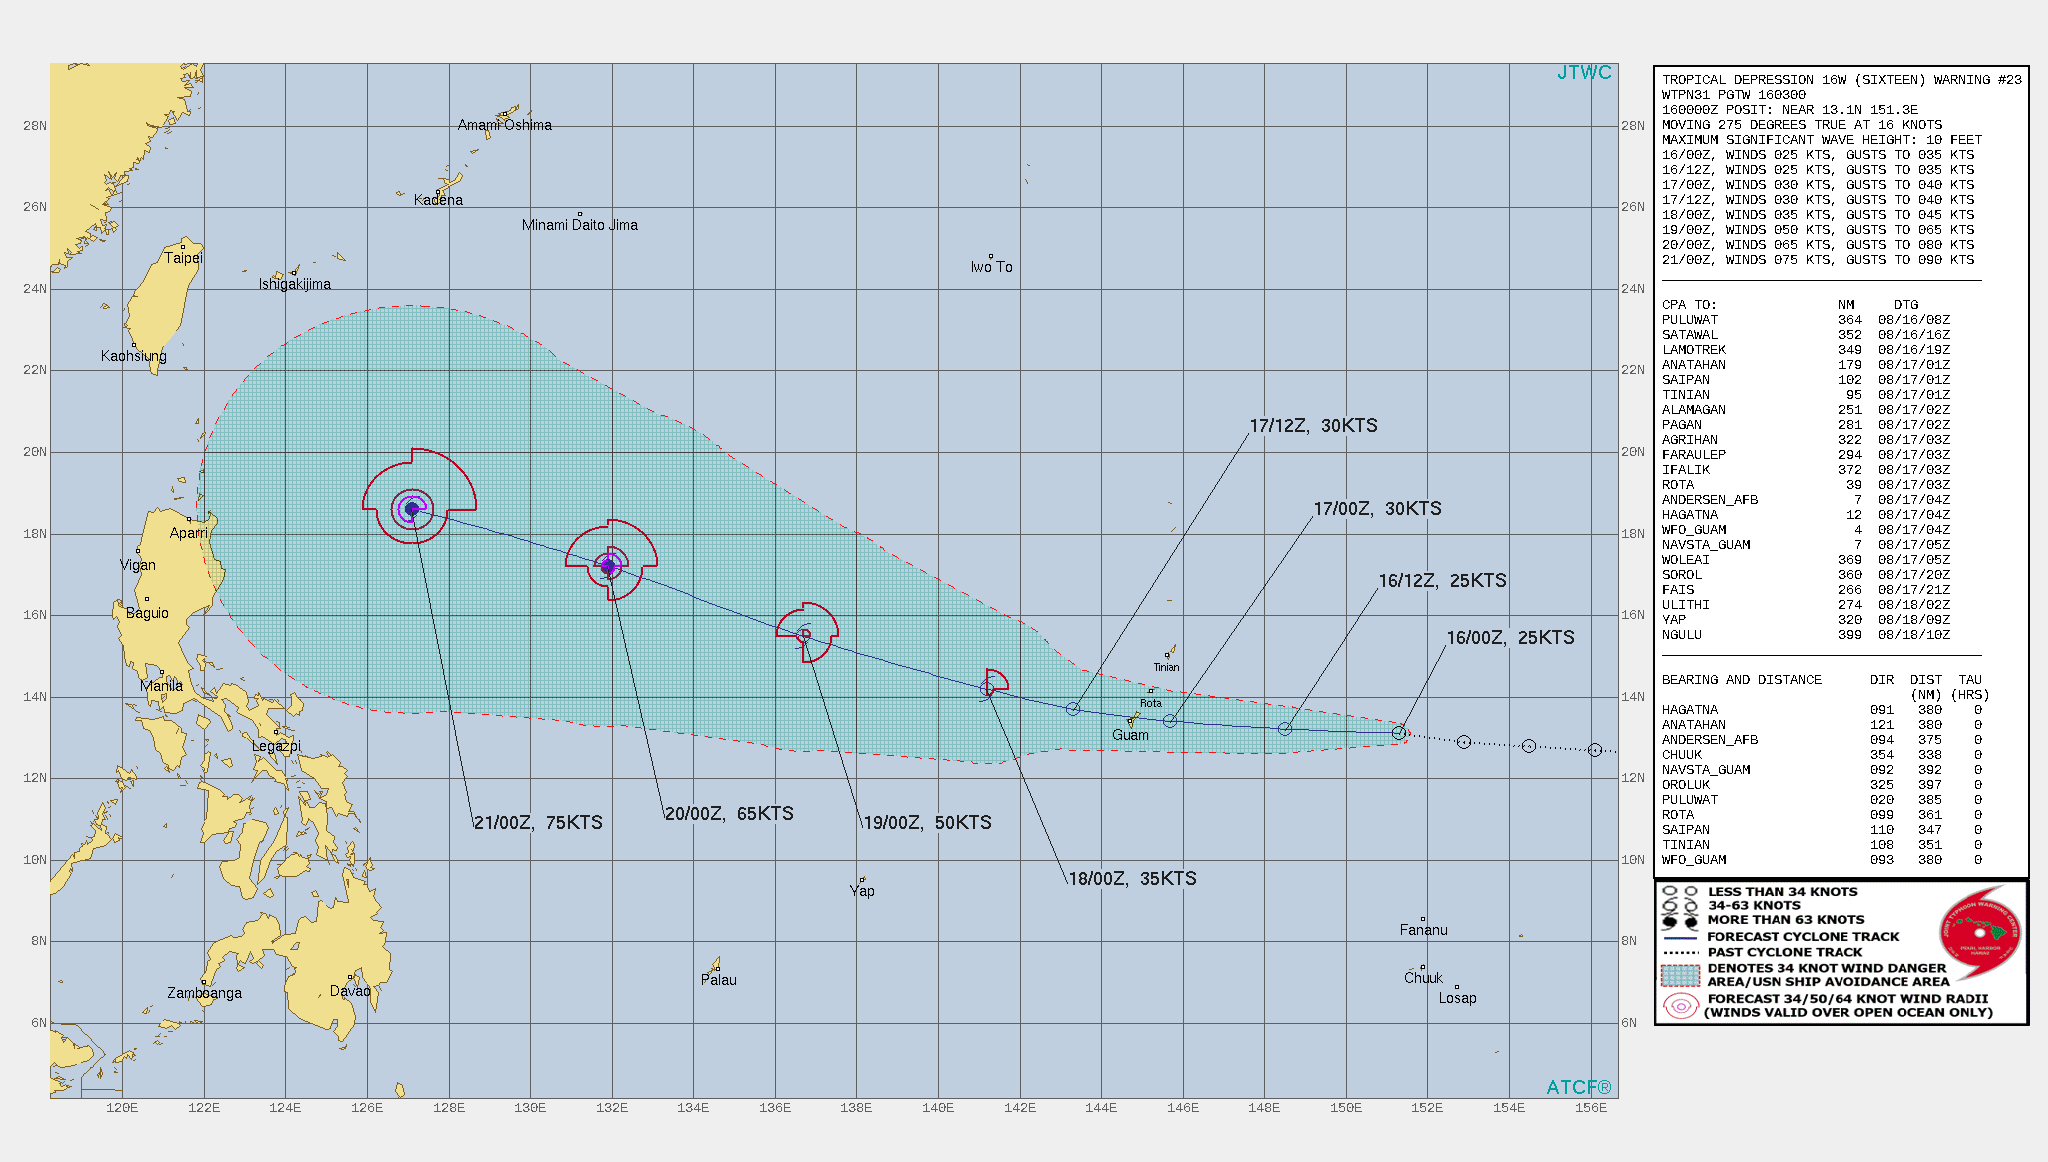 TD 16W. WARNING 23 ISSUED AT 16/03UTC.THERE ARE NO SIGNIFICANT CHANGES TO THE FORECAST FROM THE PREVIOUS WARNING.  FORECAST DISCUSSION: TD 16W IS EXPECTED TO TRACK WESTWARD ALONG THE SOUTHERN PERIPHERY OF THE SUBTROPICAL RIDGE(STR) THROUGH 48H THEN TURN WEST-NORTHWESTWARD THROUGH 120H AS IT TRACKS ALONG THE SOUTHWEST PERIPHERY OF THE STR. TD 16W SHOULD SLOWLY INTENSIFY BY 48h AS ENVIRONMENTAL CONDITIONS GRADUALLY IMPROVE. AFTER 48H, TD 16W WILL STEADILY INTENSIFY THROUGH THE REMAINDER OF THE PERIOD TO A PEAK INTENSITY OF 75 KNOTS/CAT 1 BY 120H.